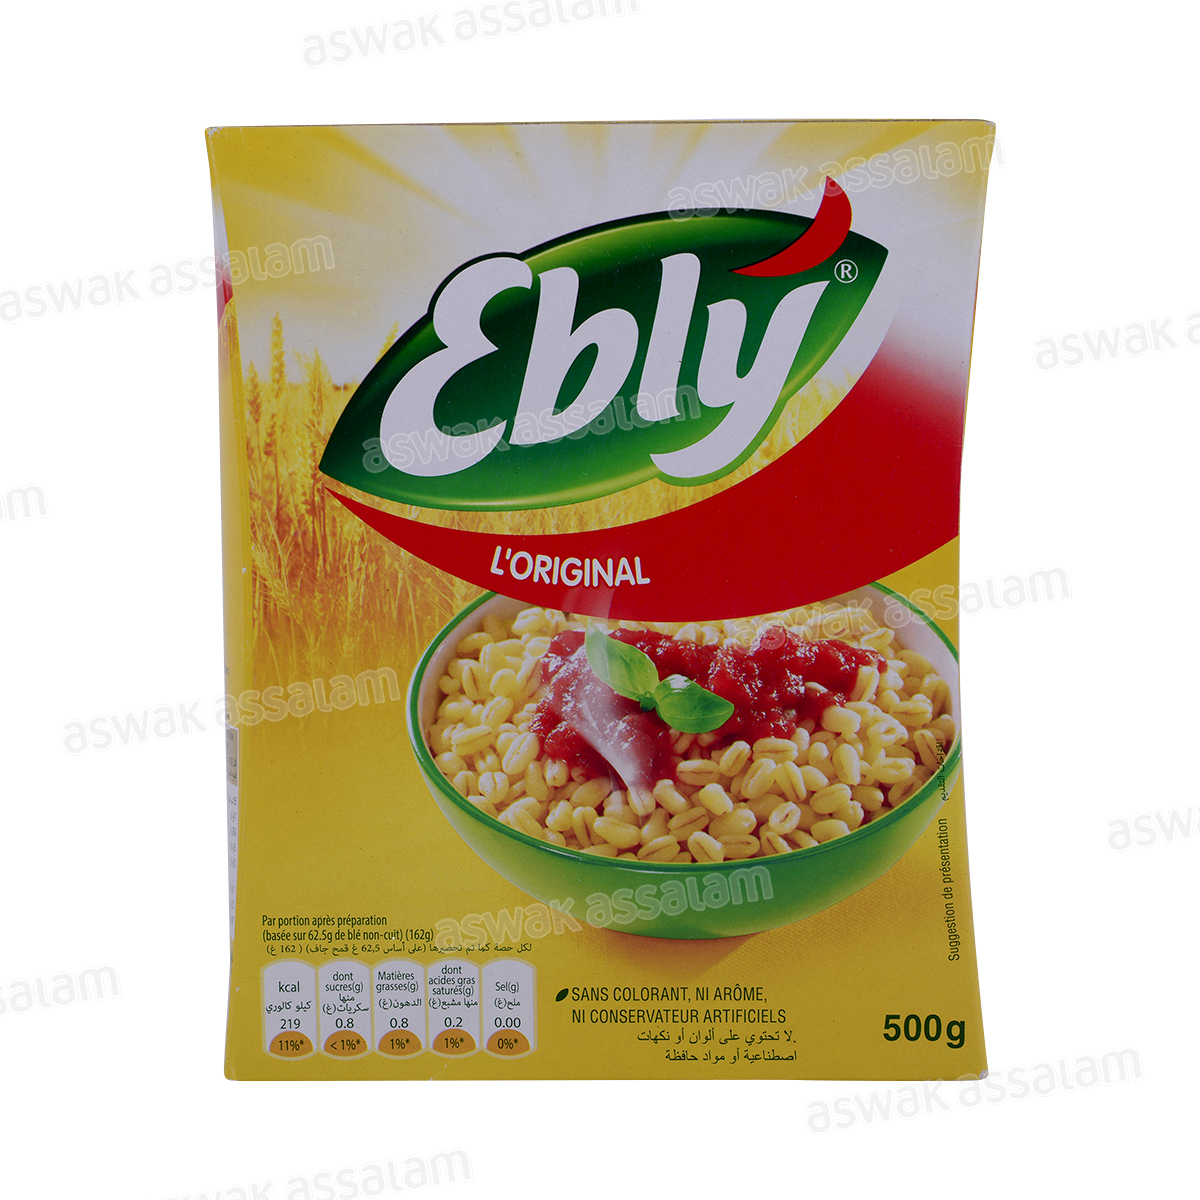 BLE 10 MIN CUISSON 500G EBLY